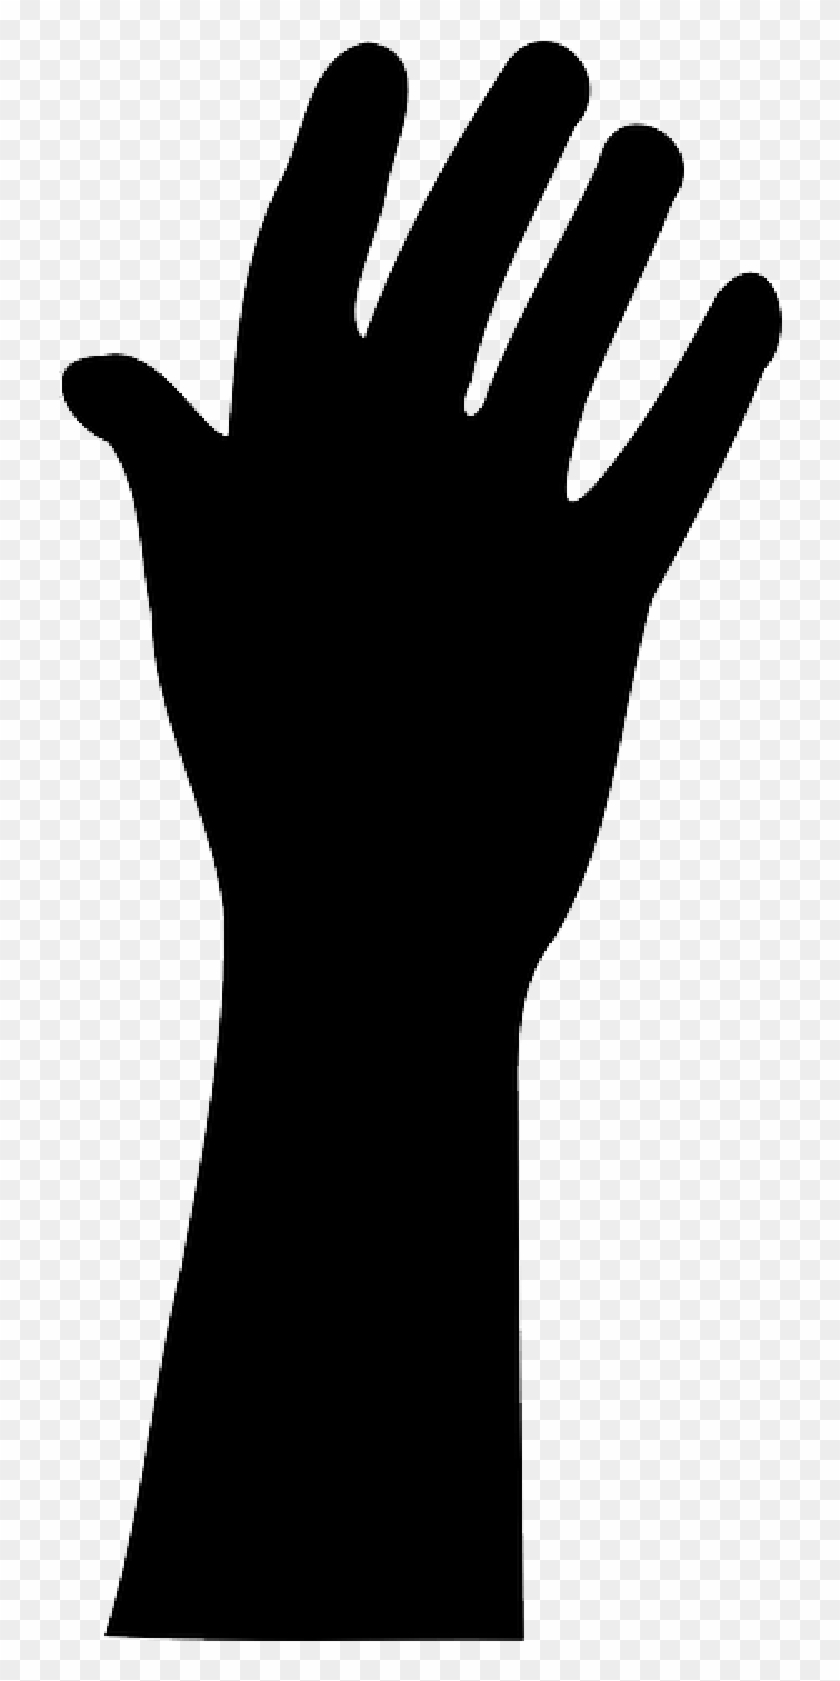 Raised Hand In Silhouette - Reaching Hand Silhouette Png Clipart #1314993